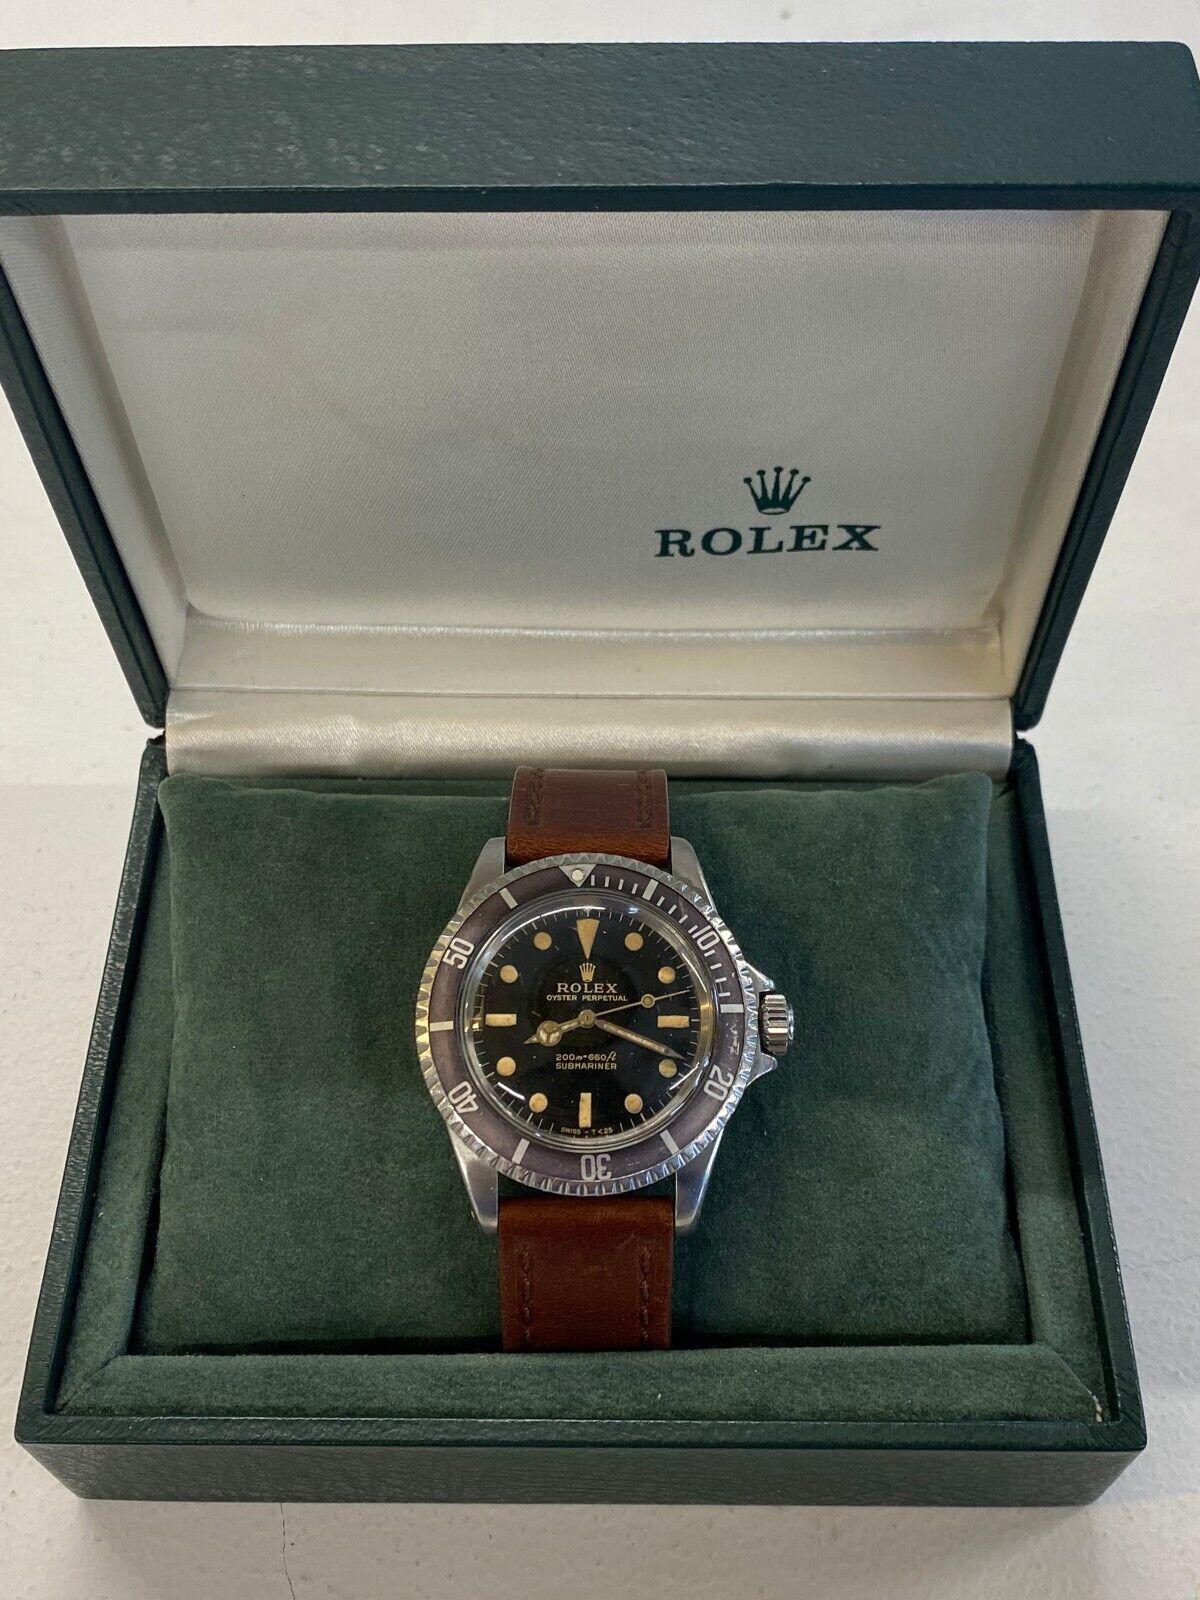 Rare ROLEX James Bond Submariner C. 1966 Watch Ref. #5513

Rolex has consistently exceeded expectations with phenomenal products, and there is no exception for this vintage circa 1966 